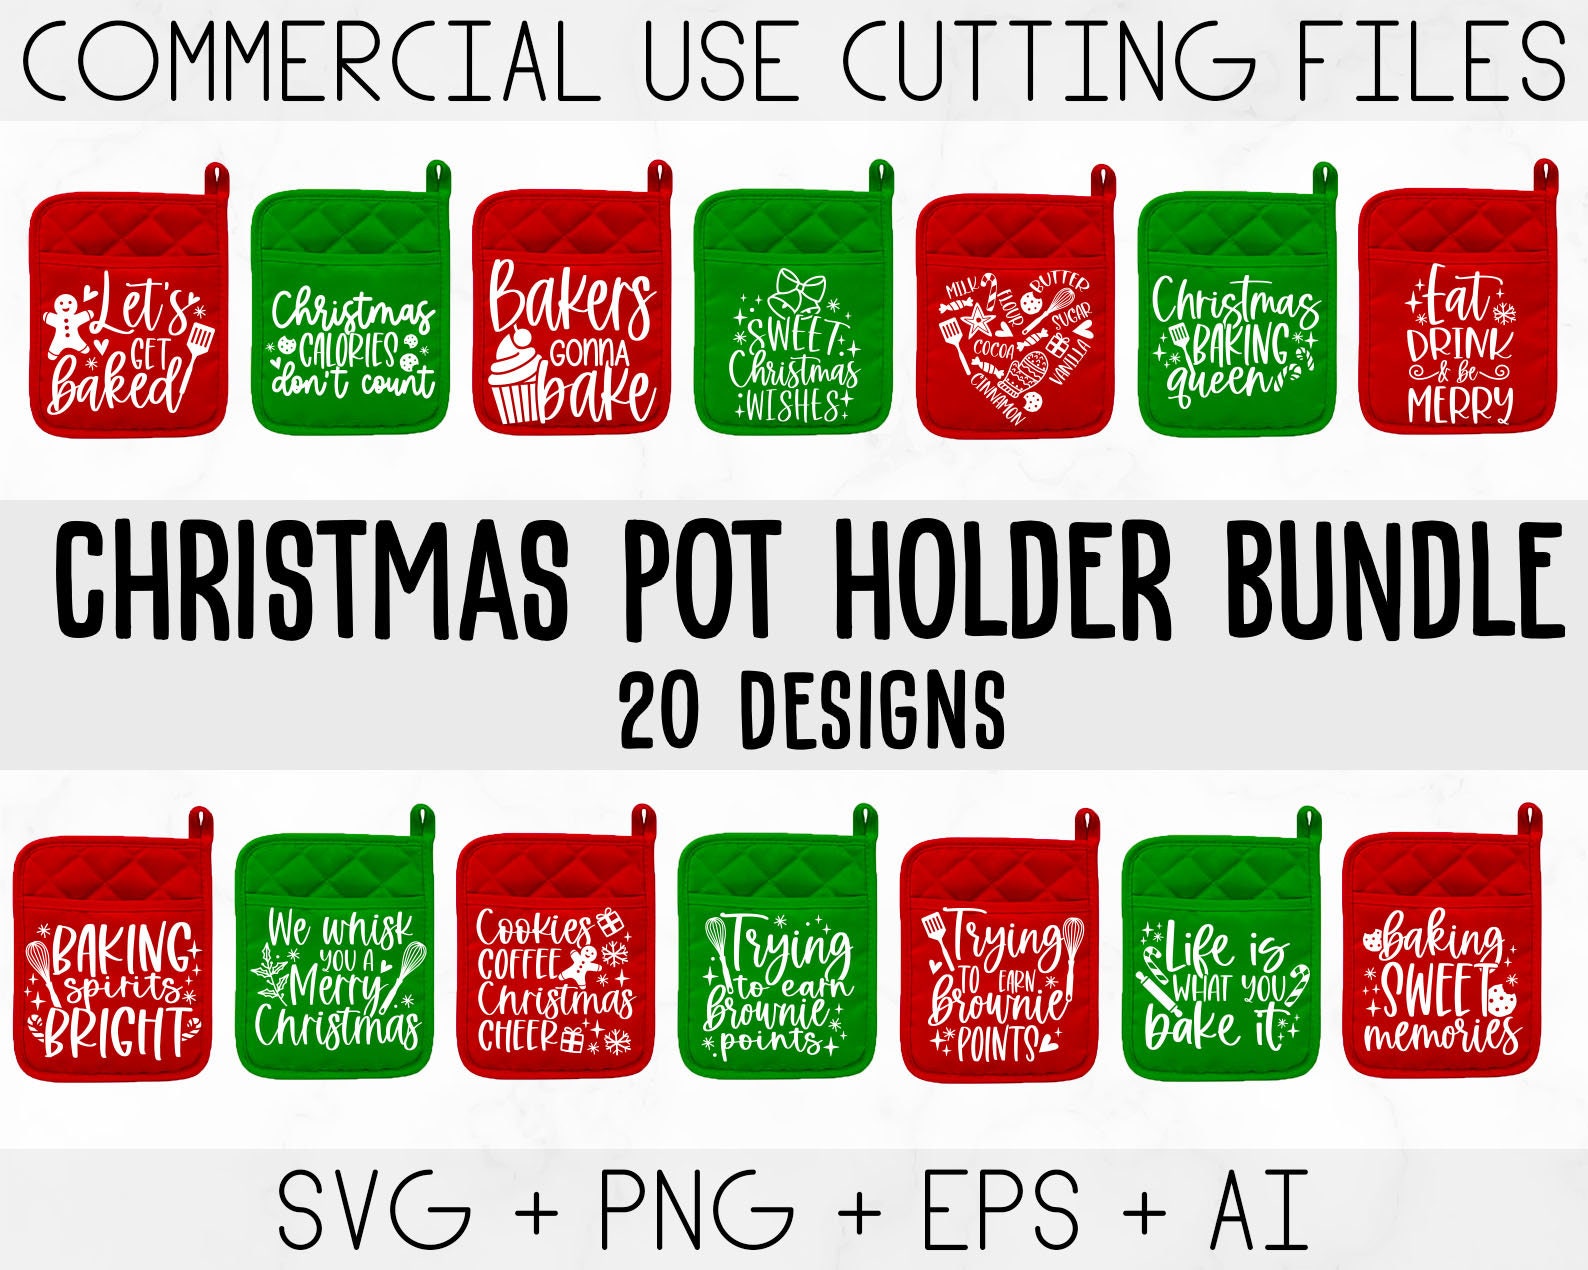 Green Potholders & Oven Mitts, Up to 70% Off Until 11/20